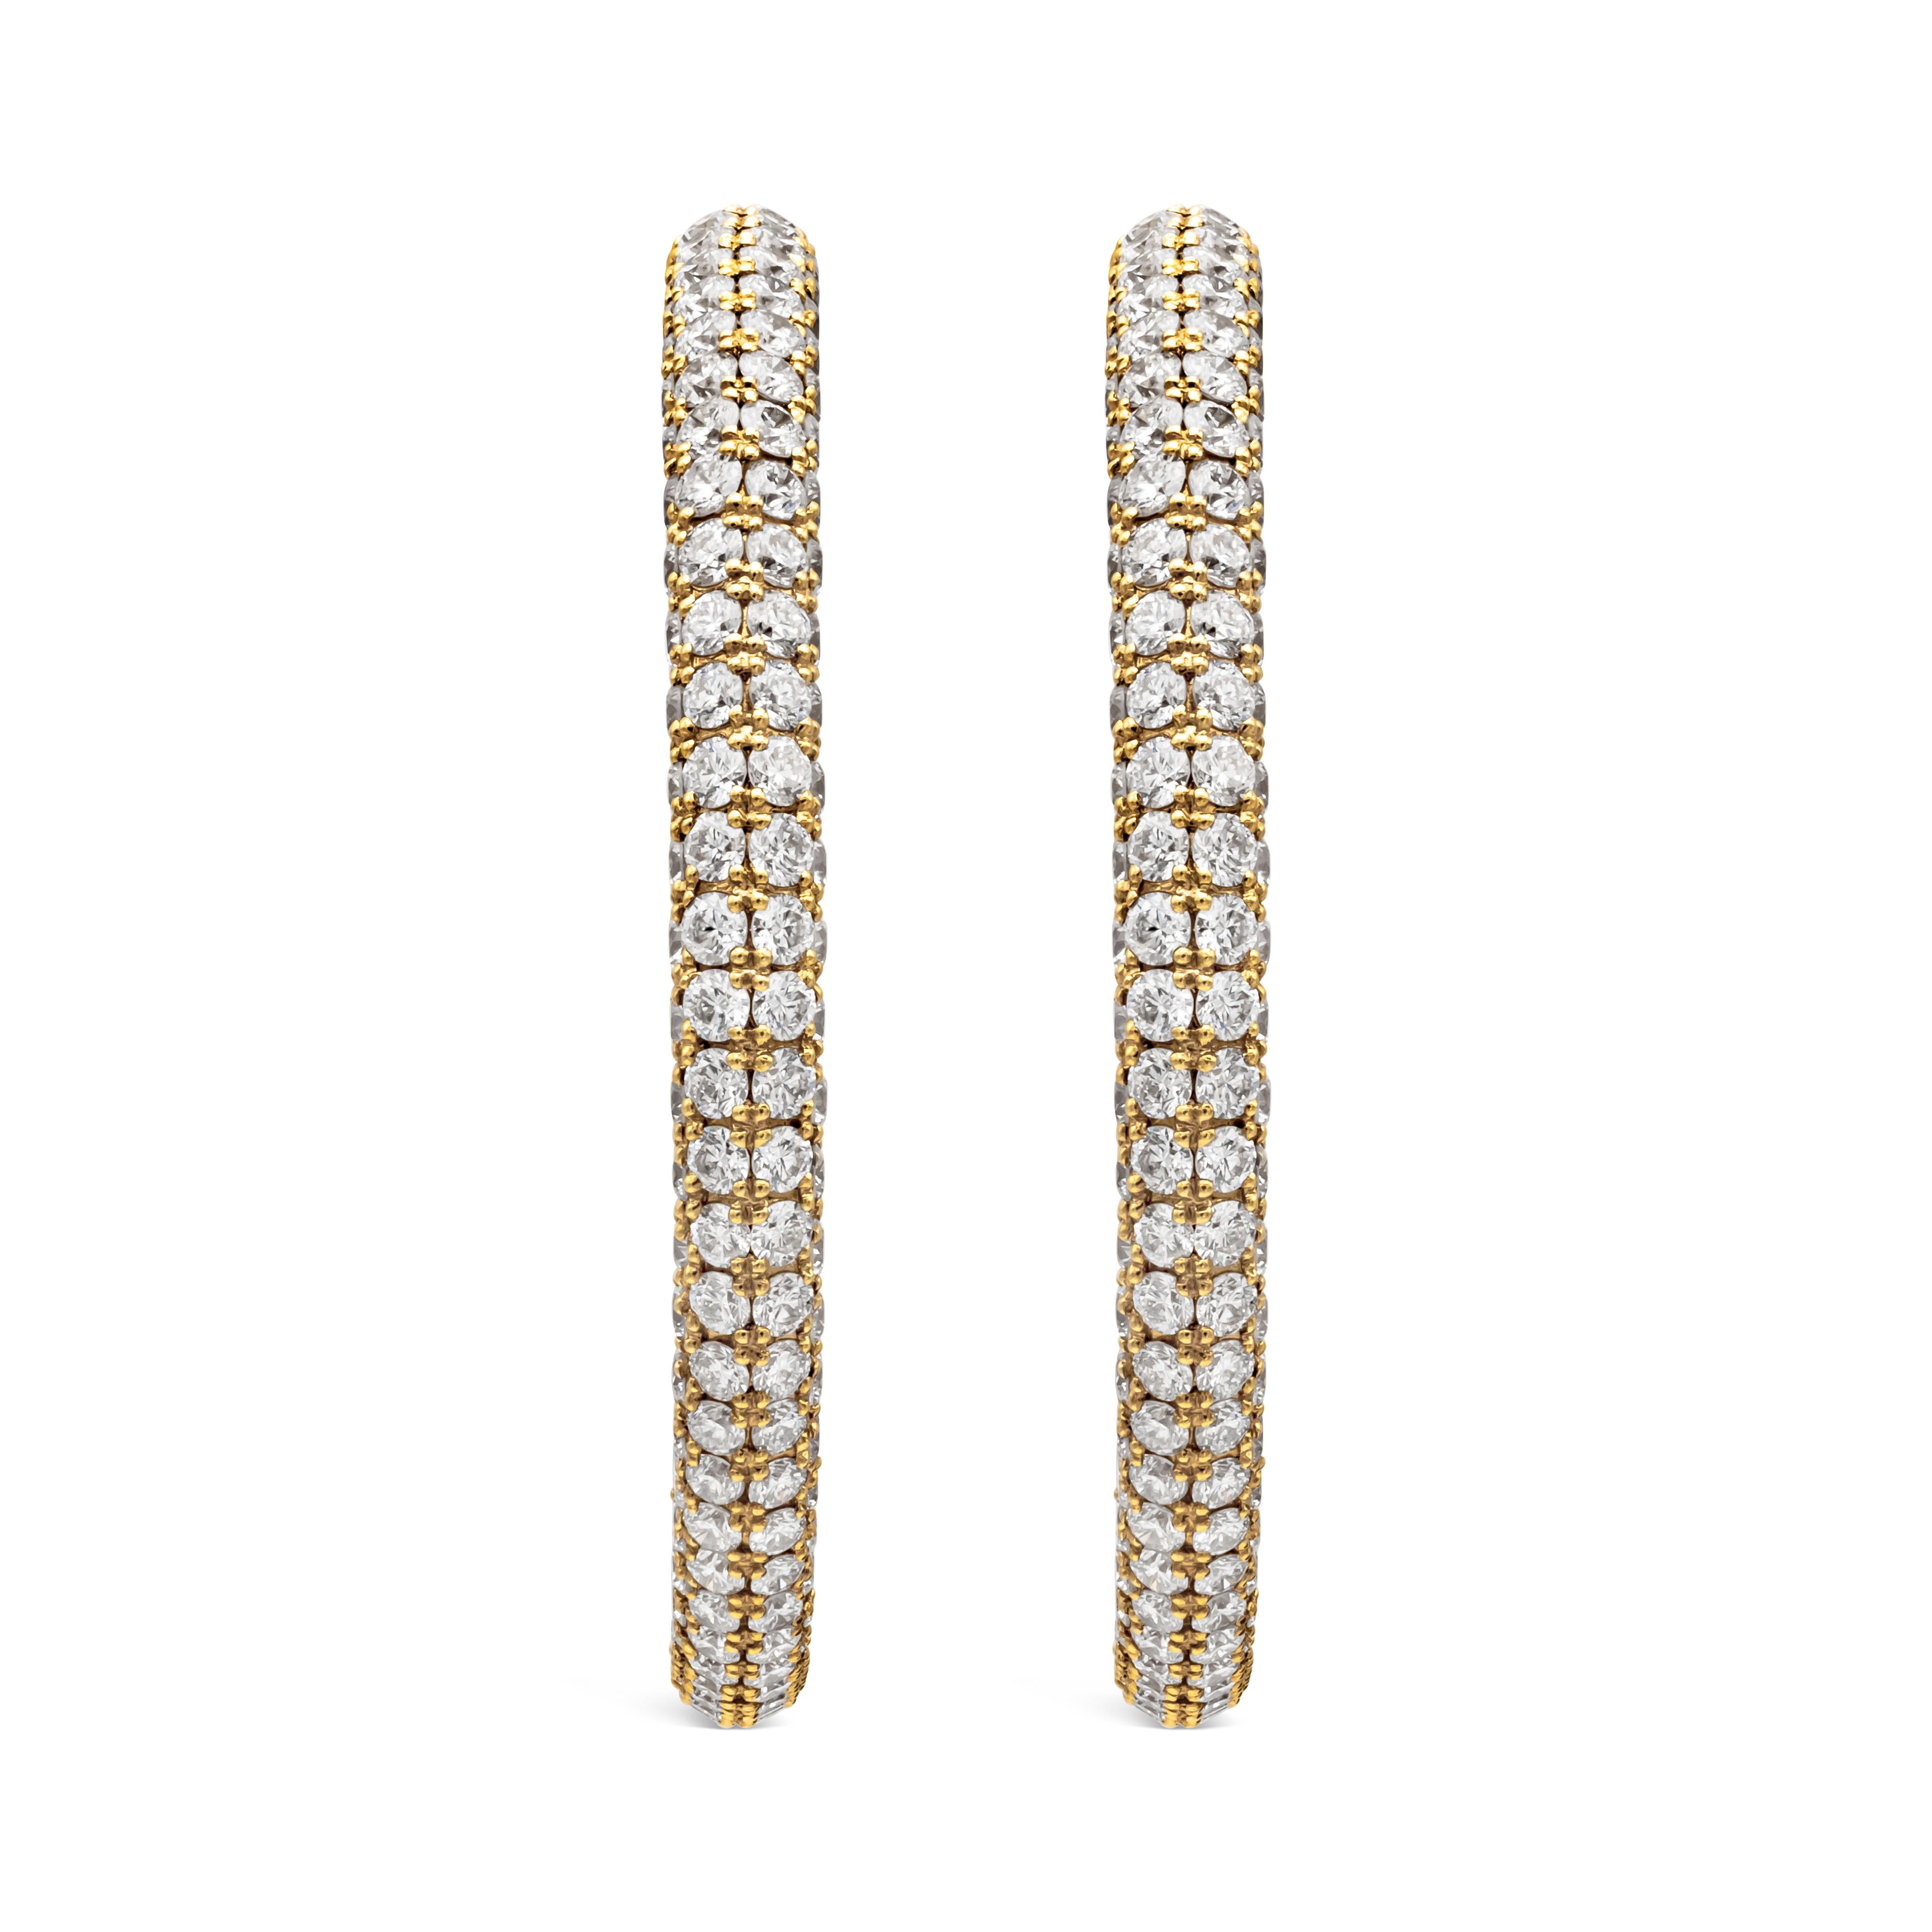 A classic hoop earrings showcasing a brilliant round diamonds weighing 10.58 carats total, set in a micro-pave set in the inside and the outside. Finely made in 18k yellow gold.

Style available in different price ranges. Prices are based on your